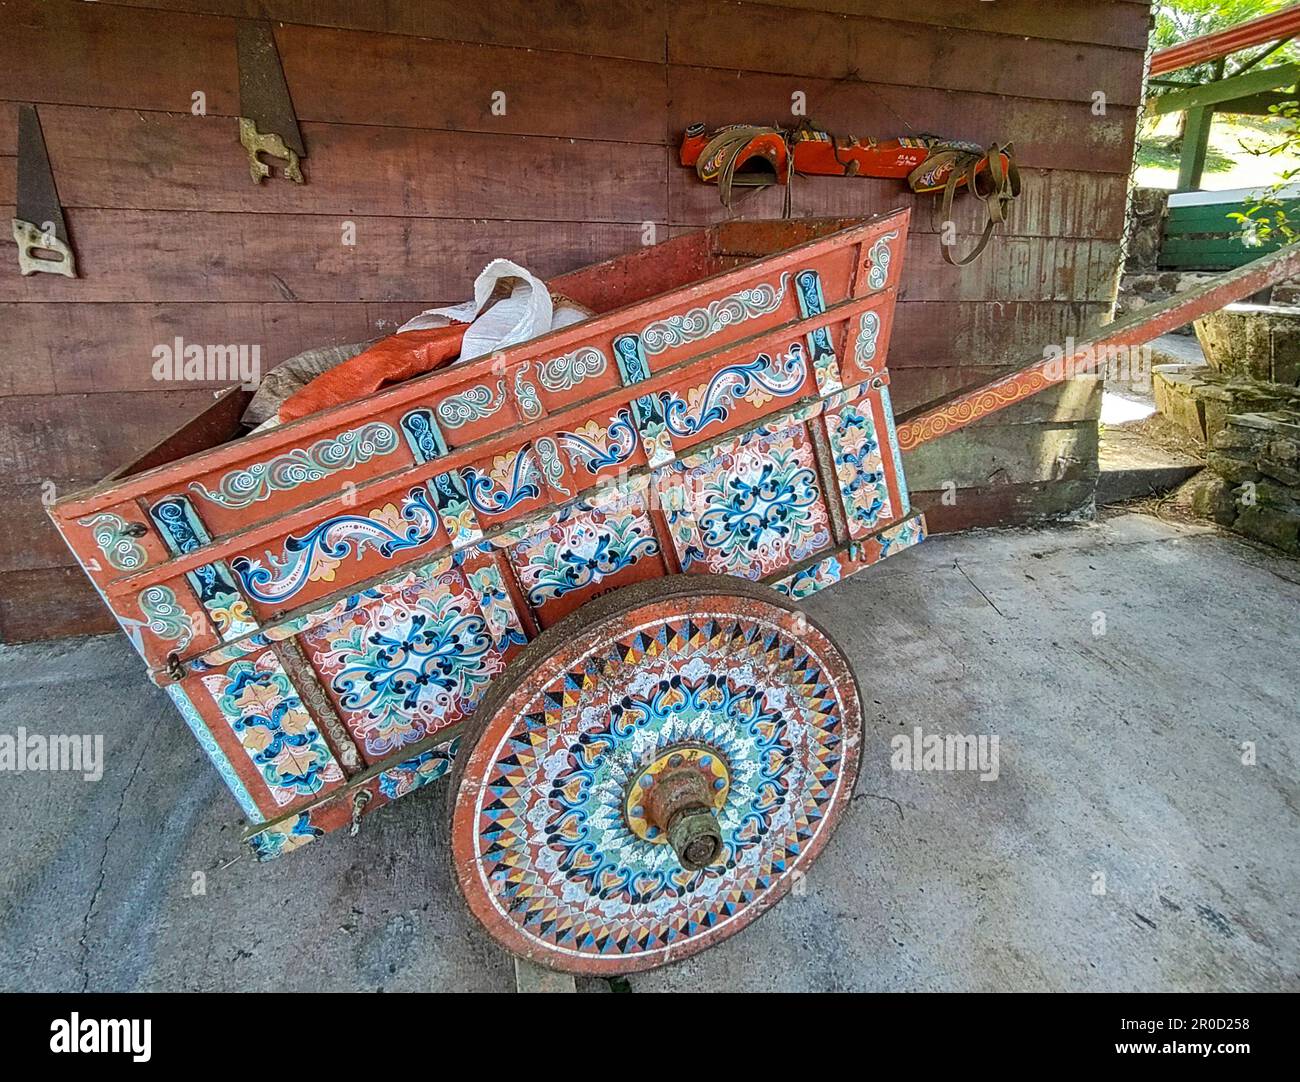 San Ramon, Costa Rica - A painted Costa Rican oxcart (carreta) on the grounds of the restaurant el Jardin. The oxcart is important in Costa Rican hist Stock Photo